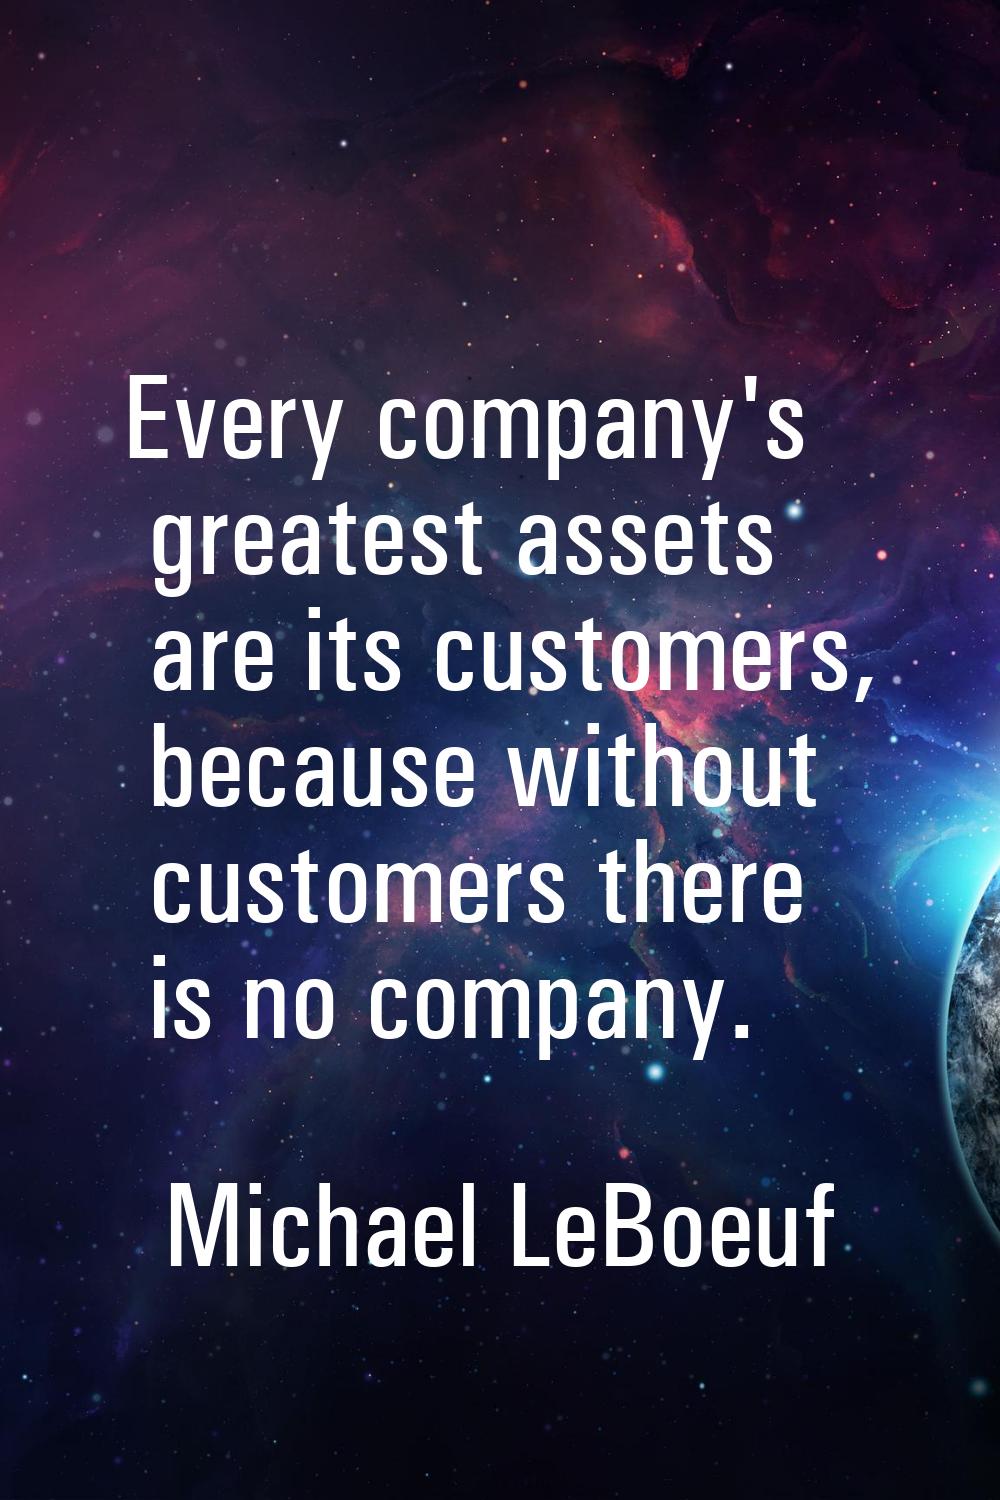 Every company's greatest assets are its customers, because without customers there is no company.